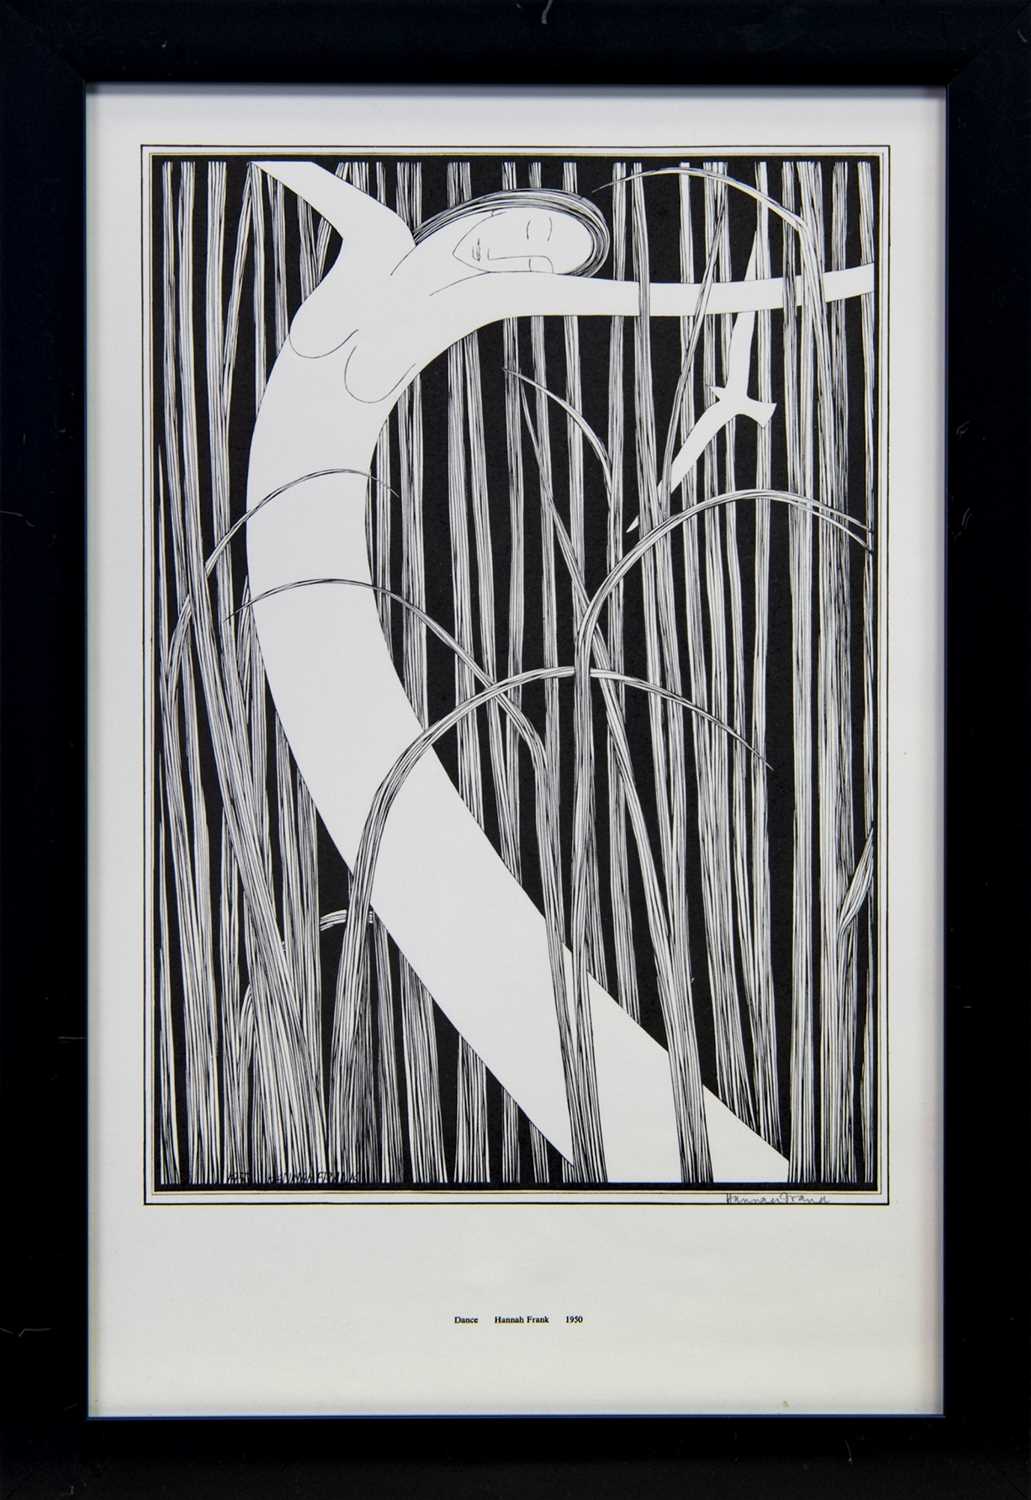 Lot 688 - DANCE, A LITHOGRAPH BY HANNAH FRANK